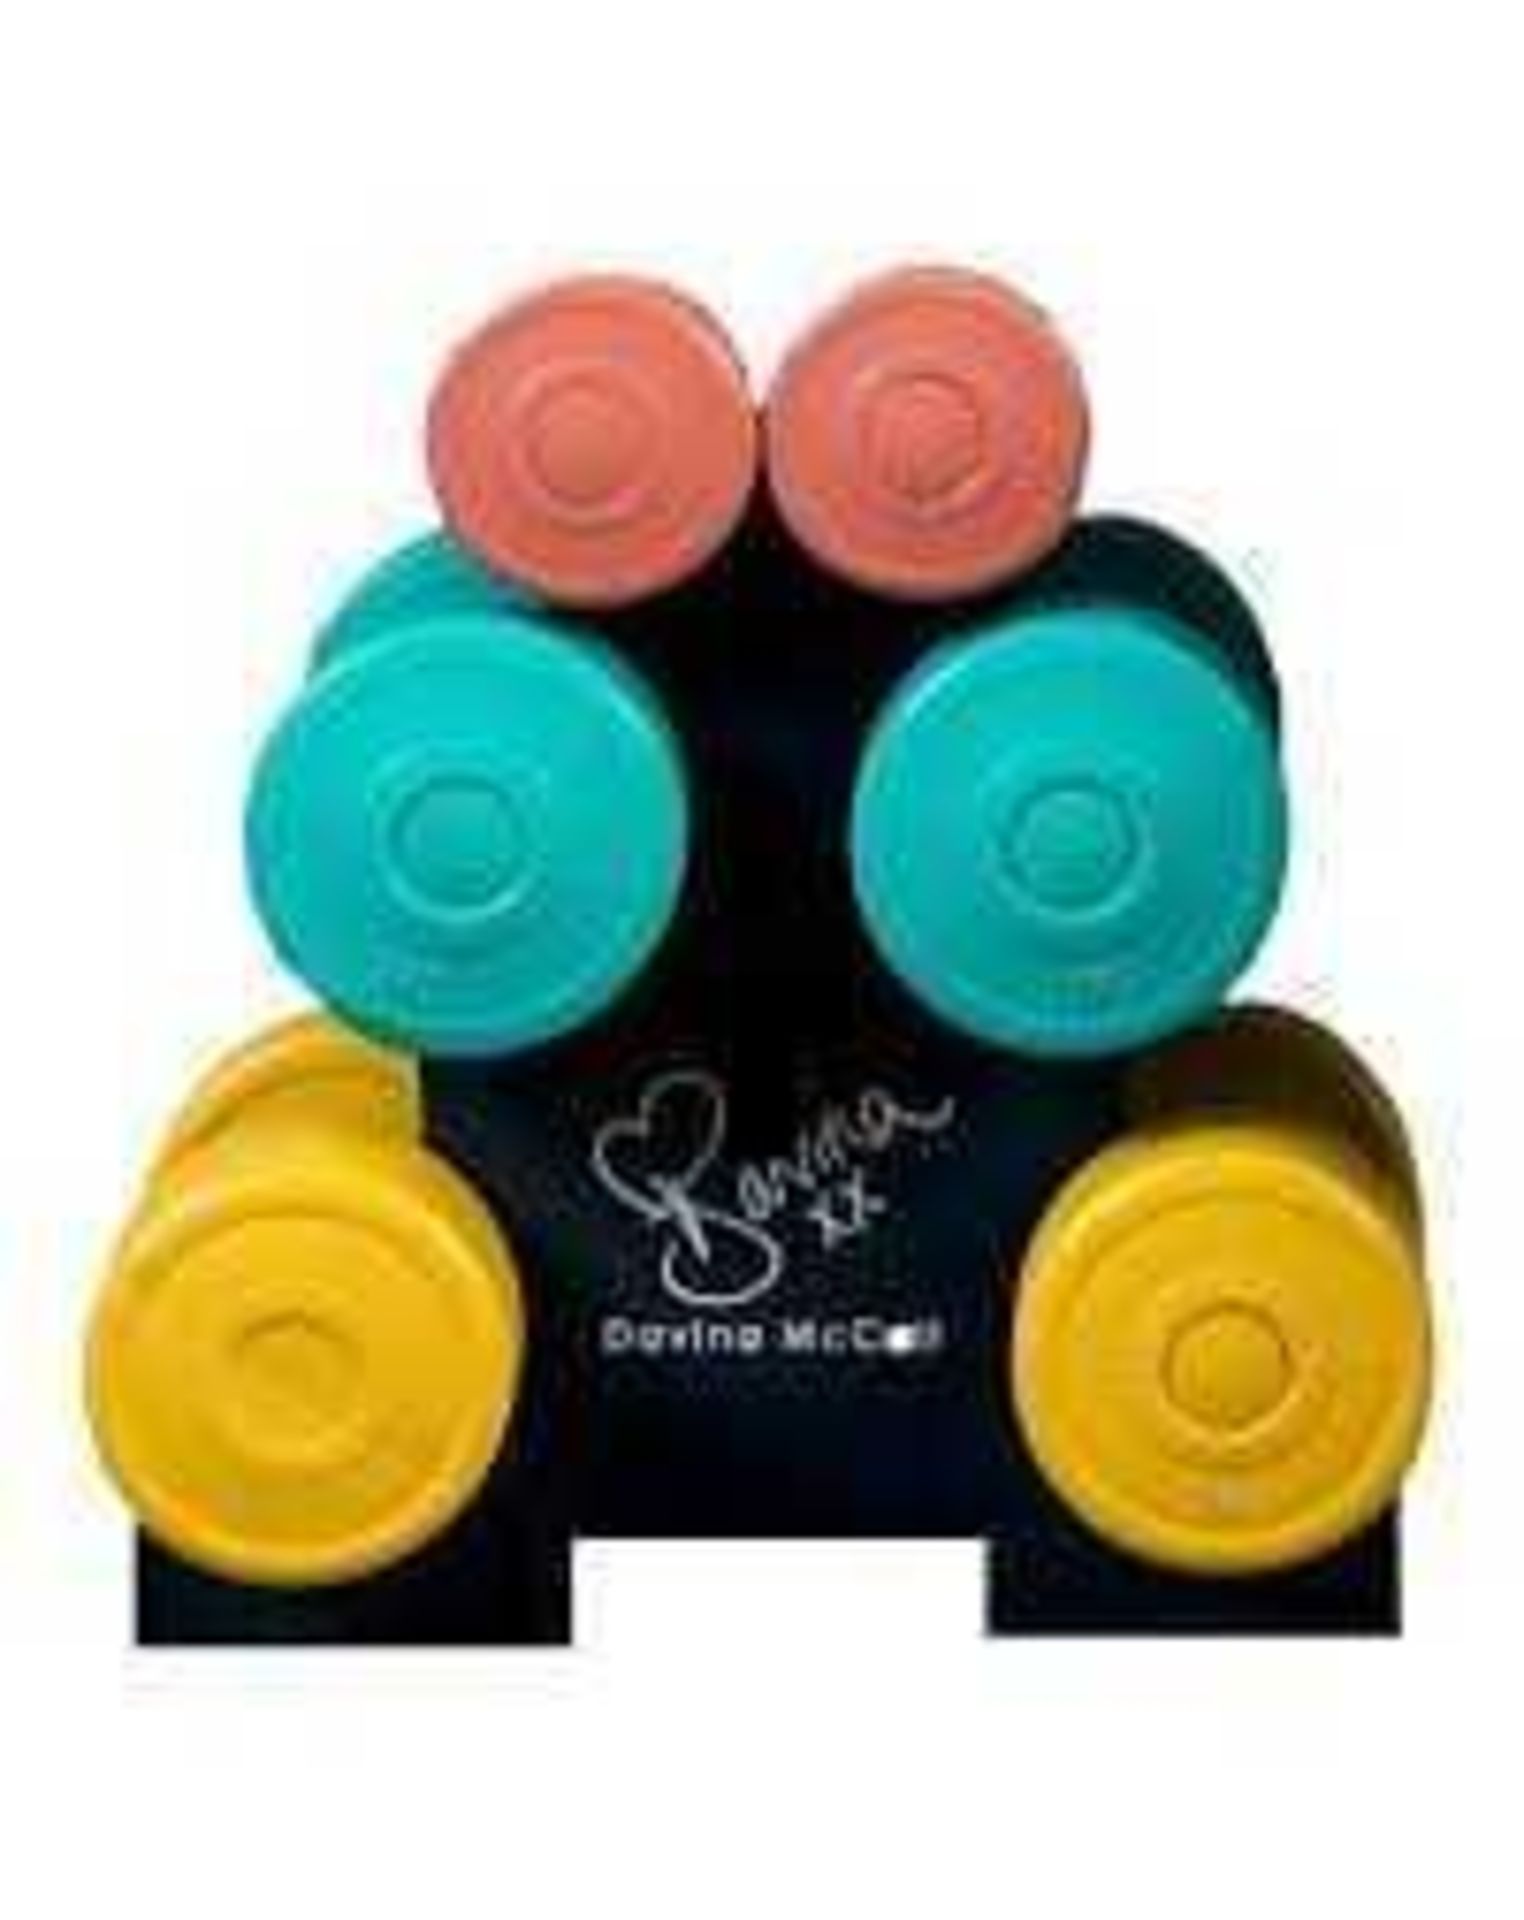 RRP £70 Boxed Set Of Davina McCall Cement And Pvc Dumbbells (Appraisals Available On Request) (